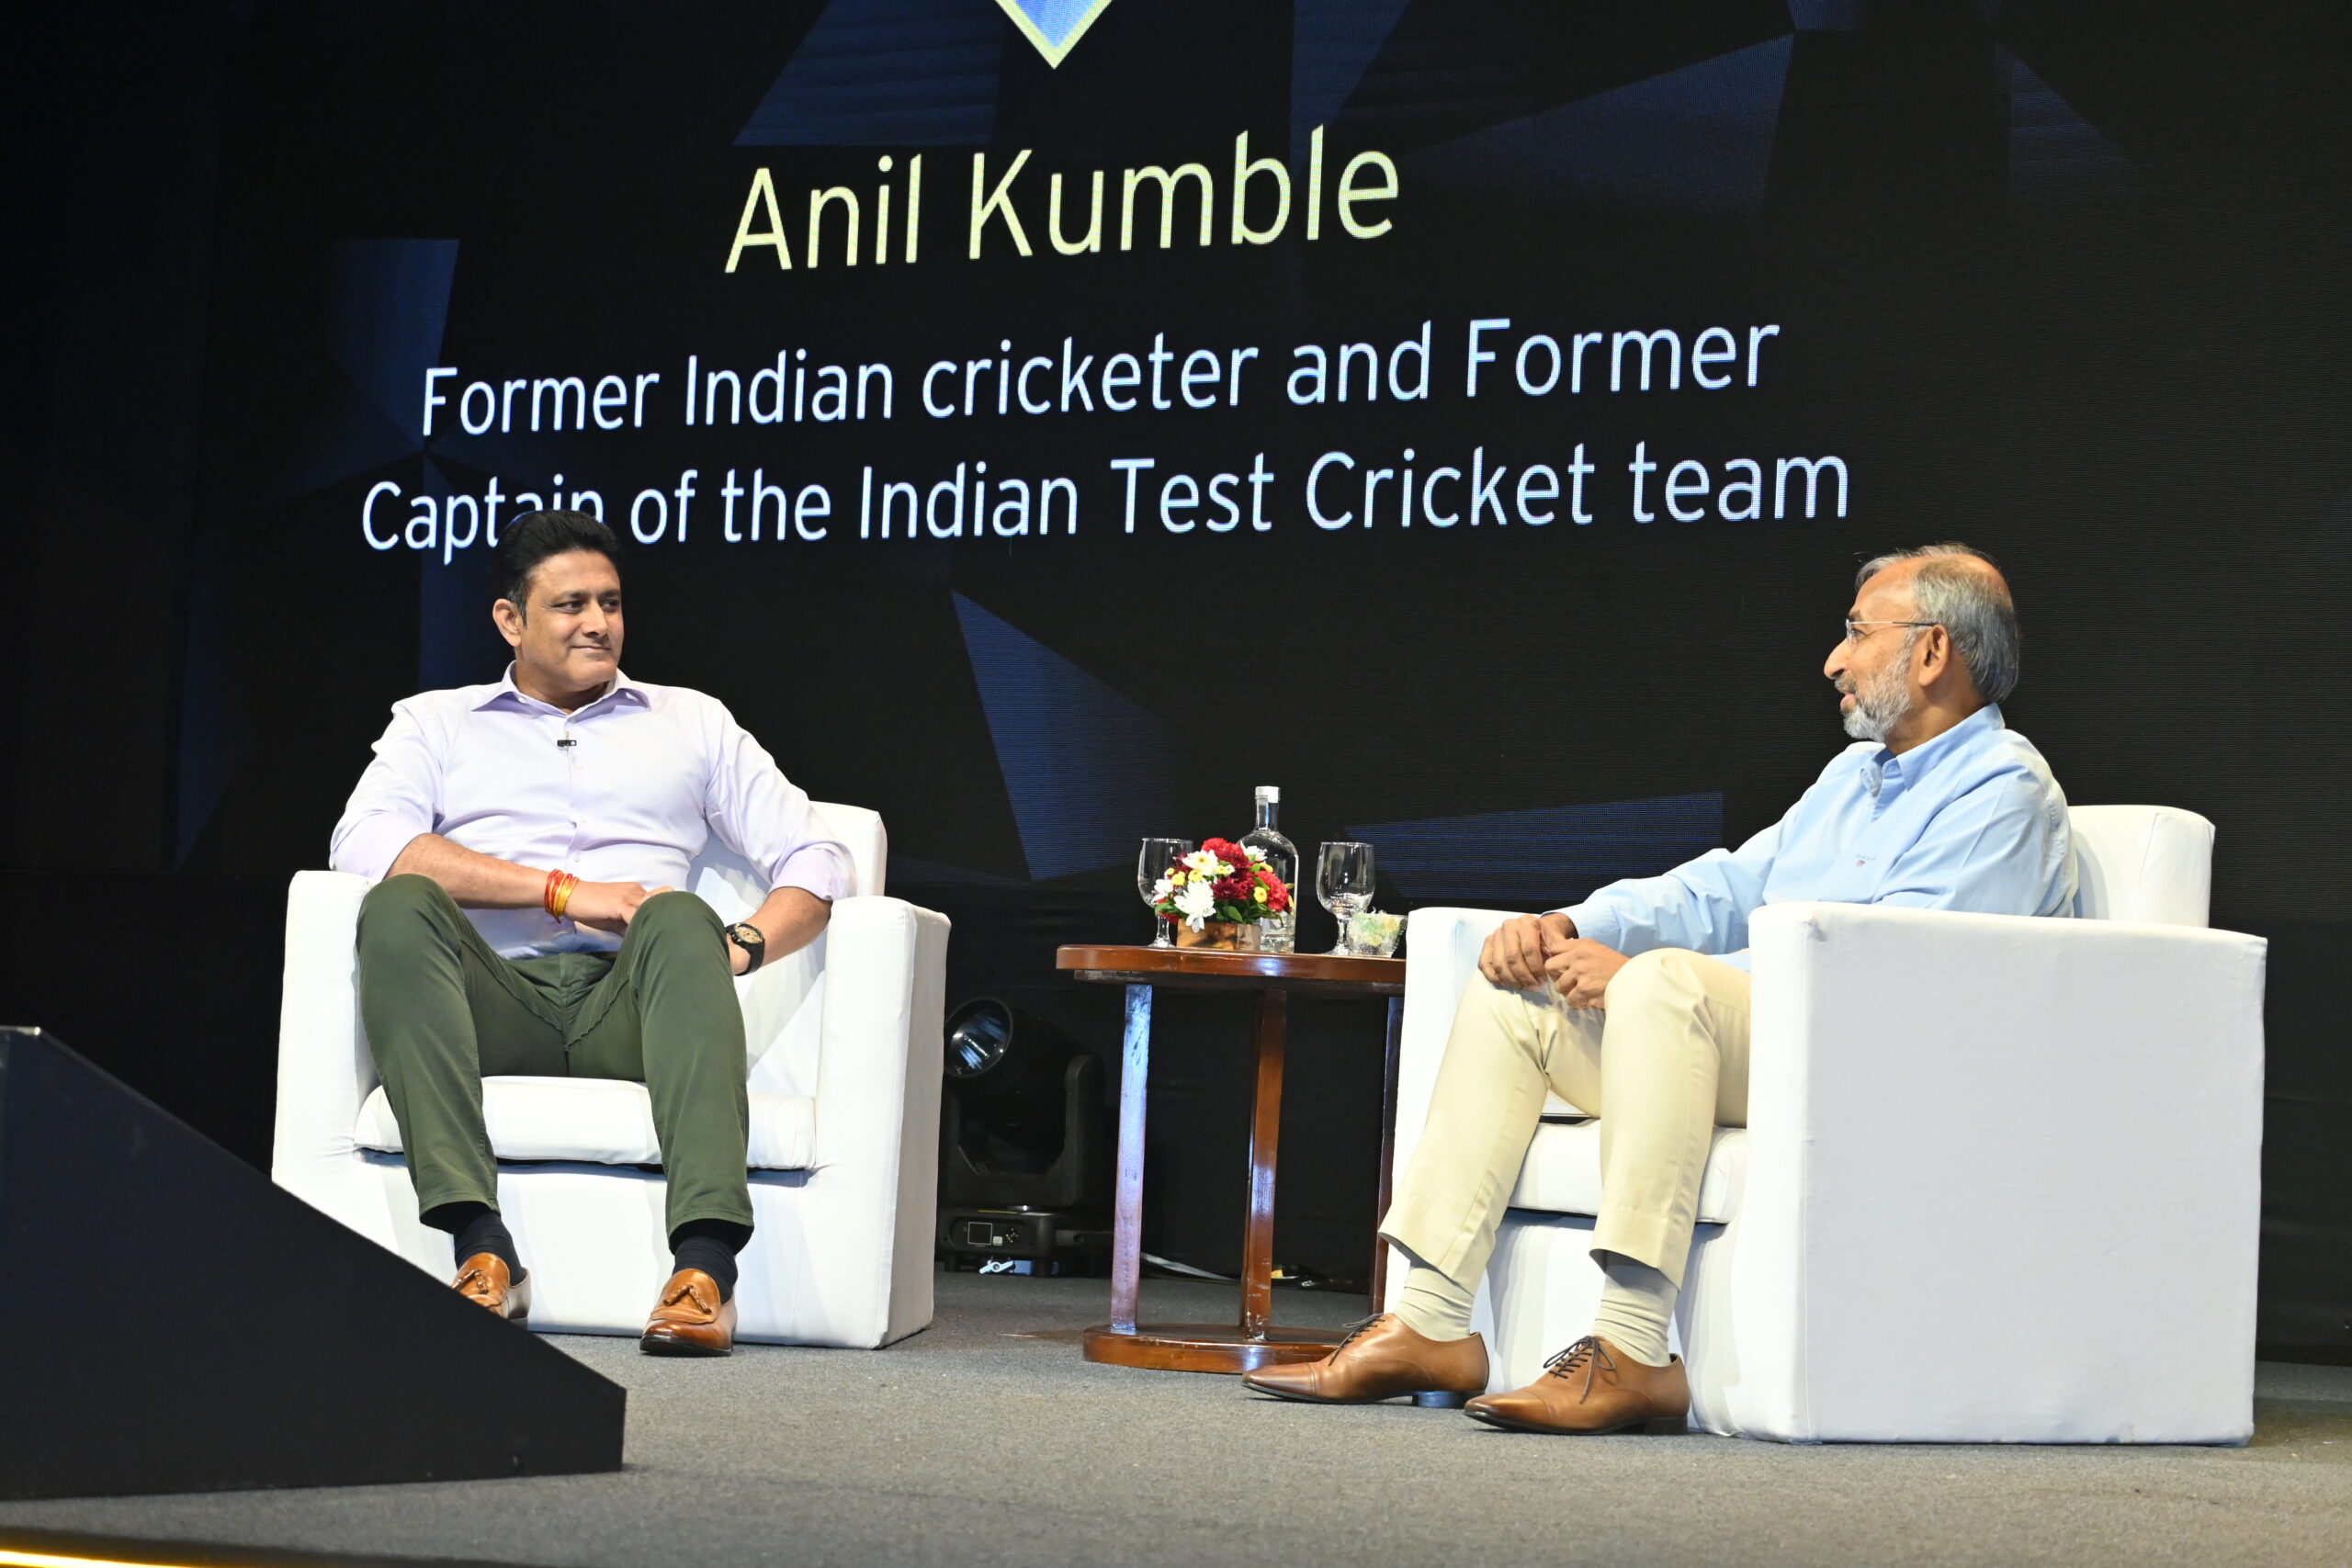 Anil Kumble at a fireside chat at the ‘All India Partners Meet’ for a corporate in Goa